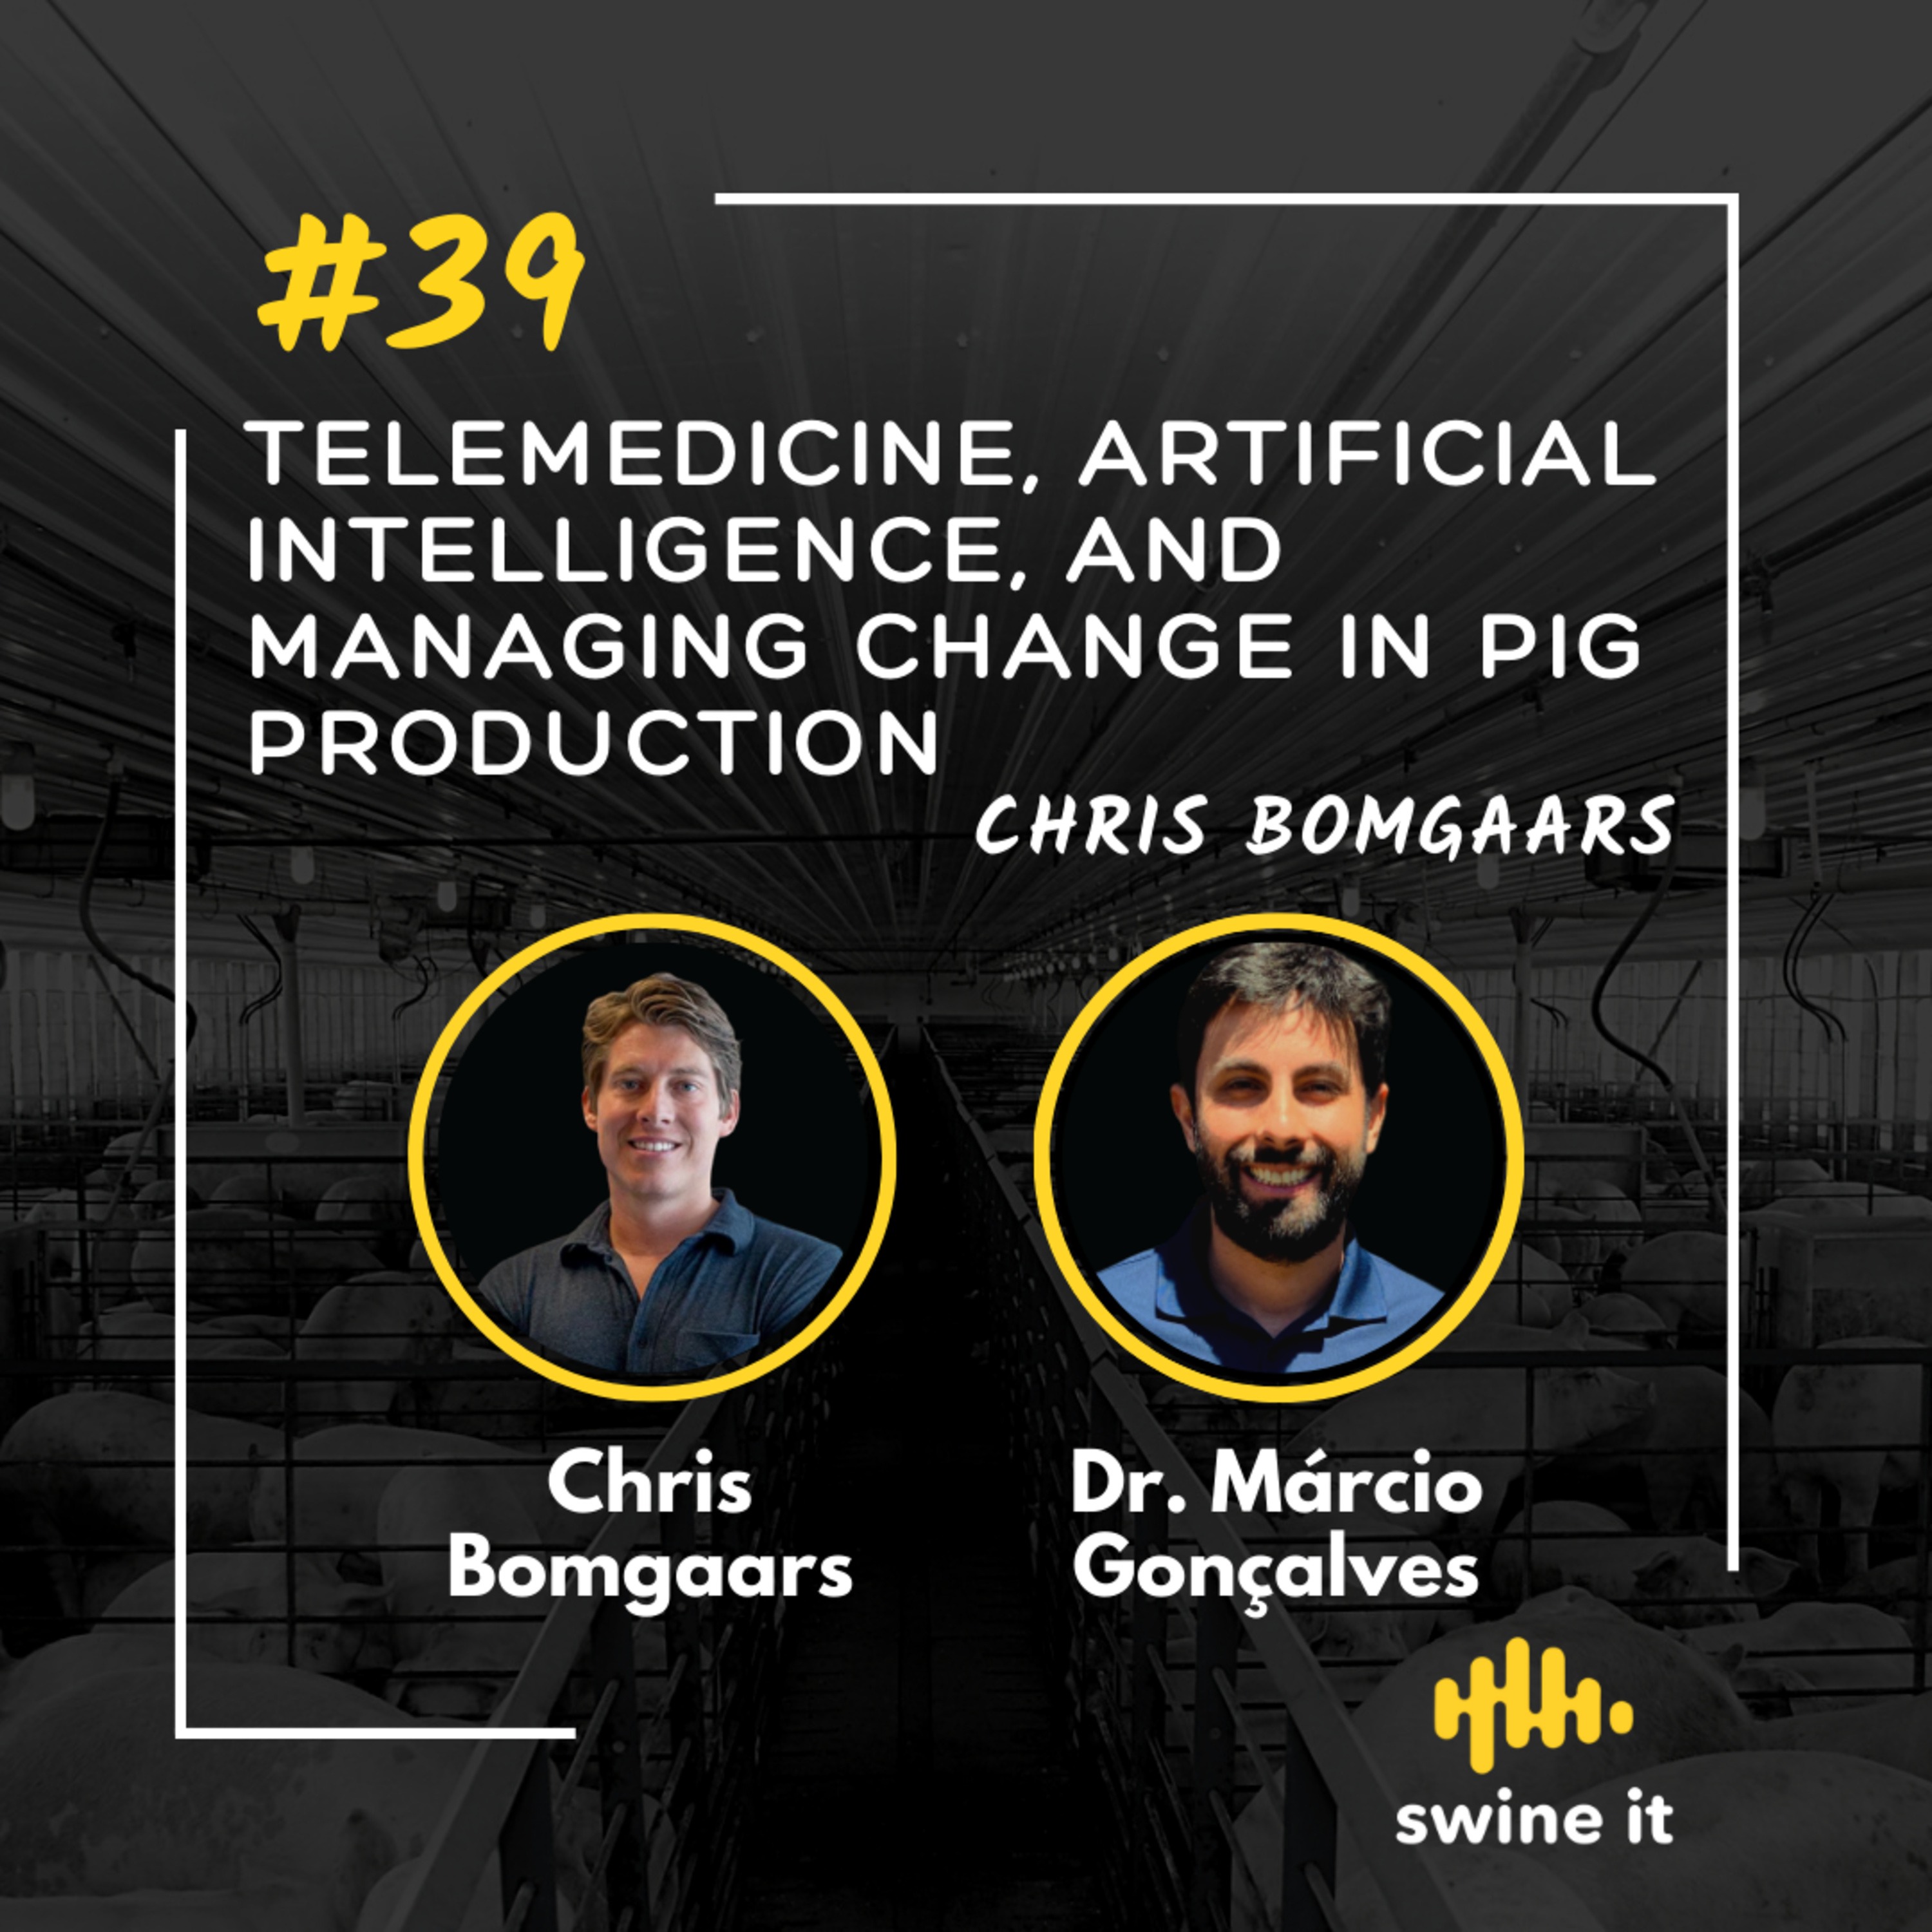 Chris Bomgaars: Telemedicine in Pig Production | Ep. 39